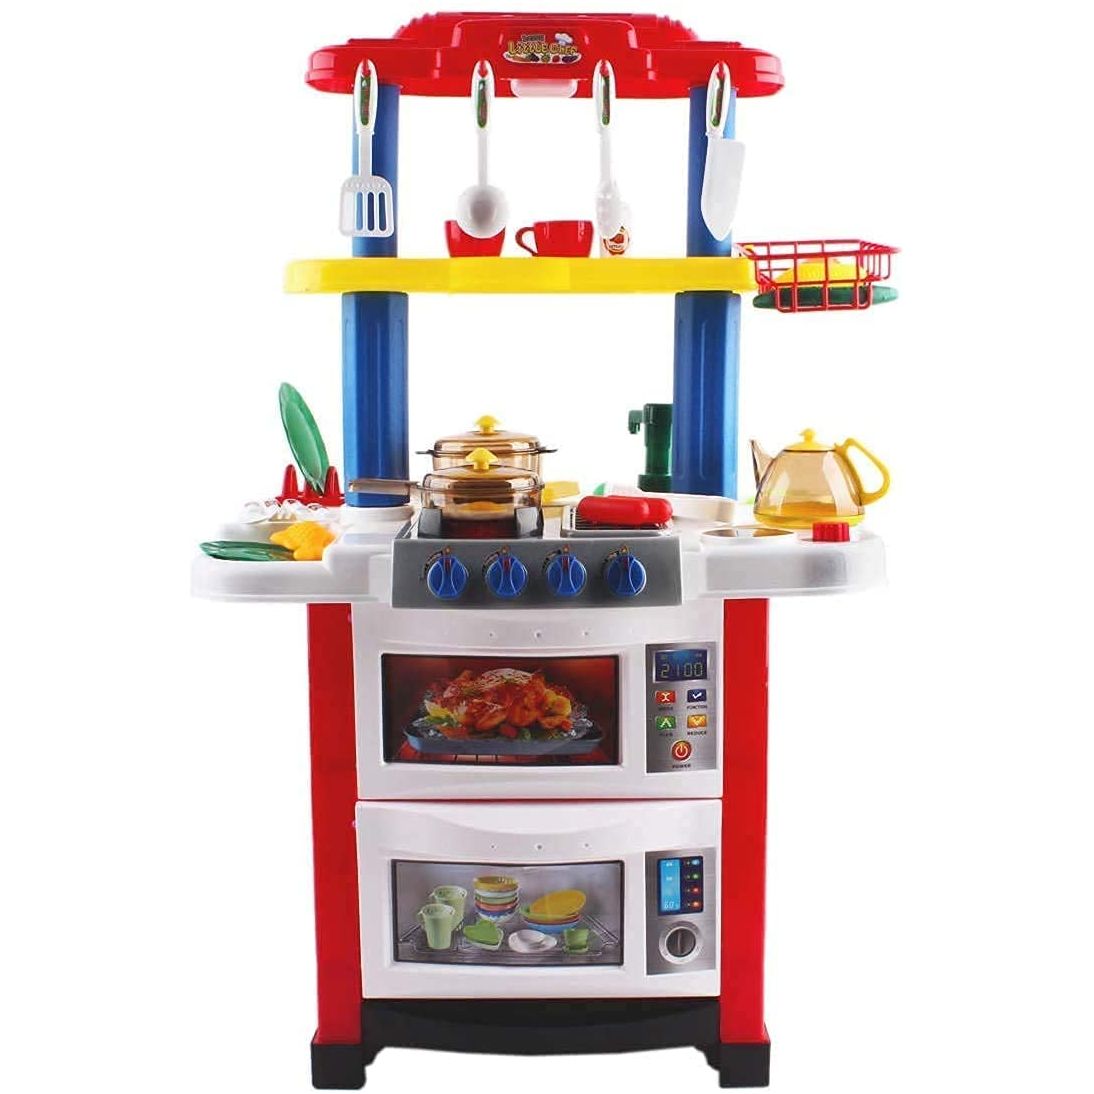 Kitchen Playset Happy Little Chef Pretend Play for Toddlers with Lights, Sounds, Real Water Features